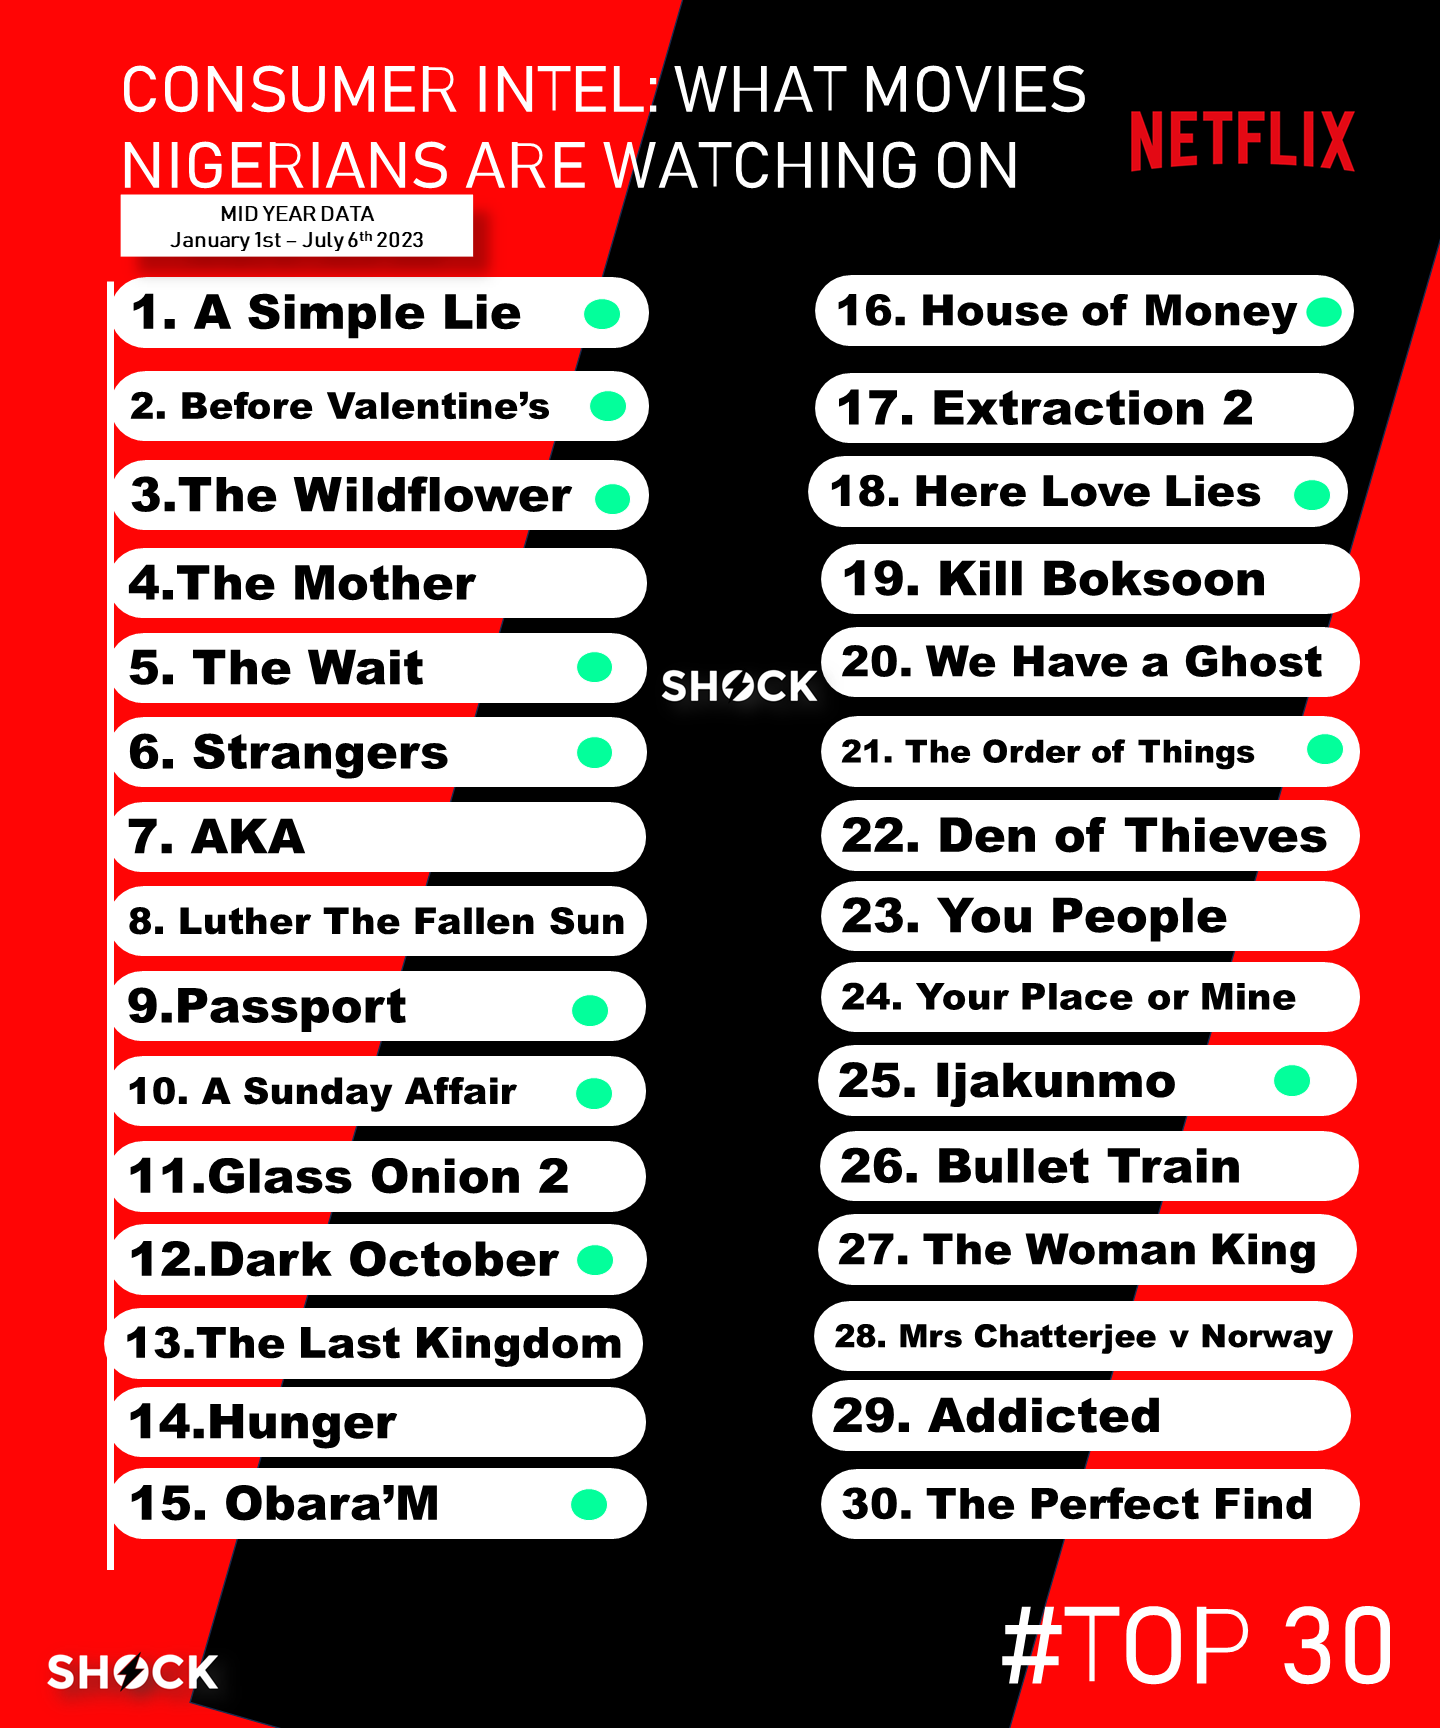 top 10 streaming data - Top 30 Movies Consumers Are Streaming On Netflix Naija in 2023 (Mid Year Data)